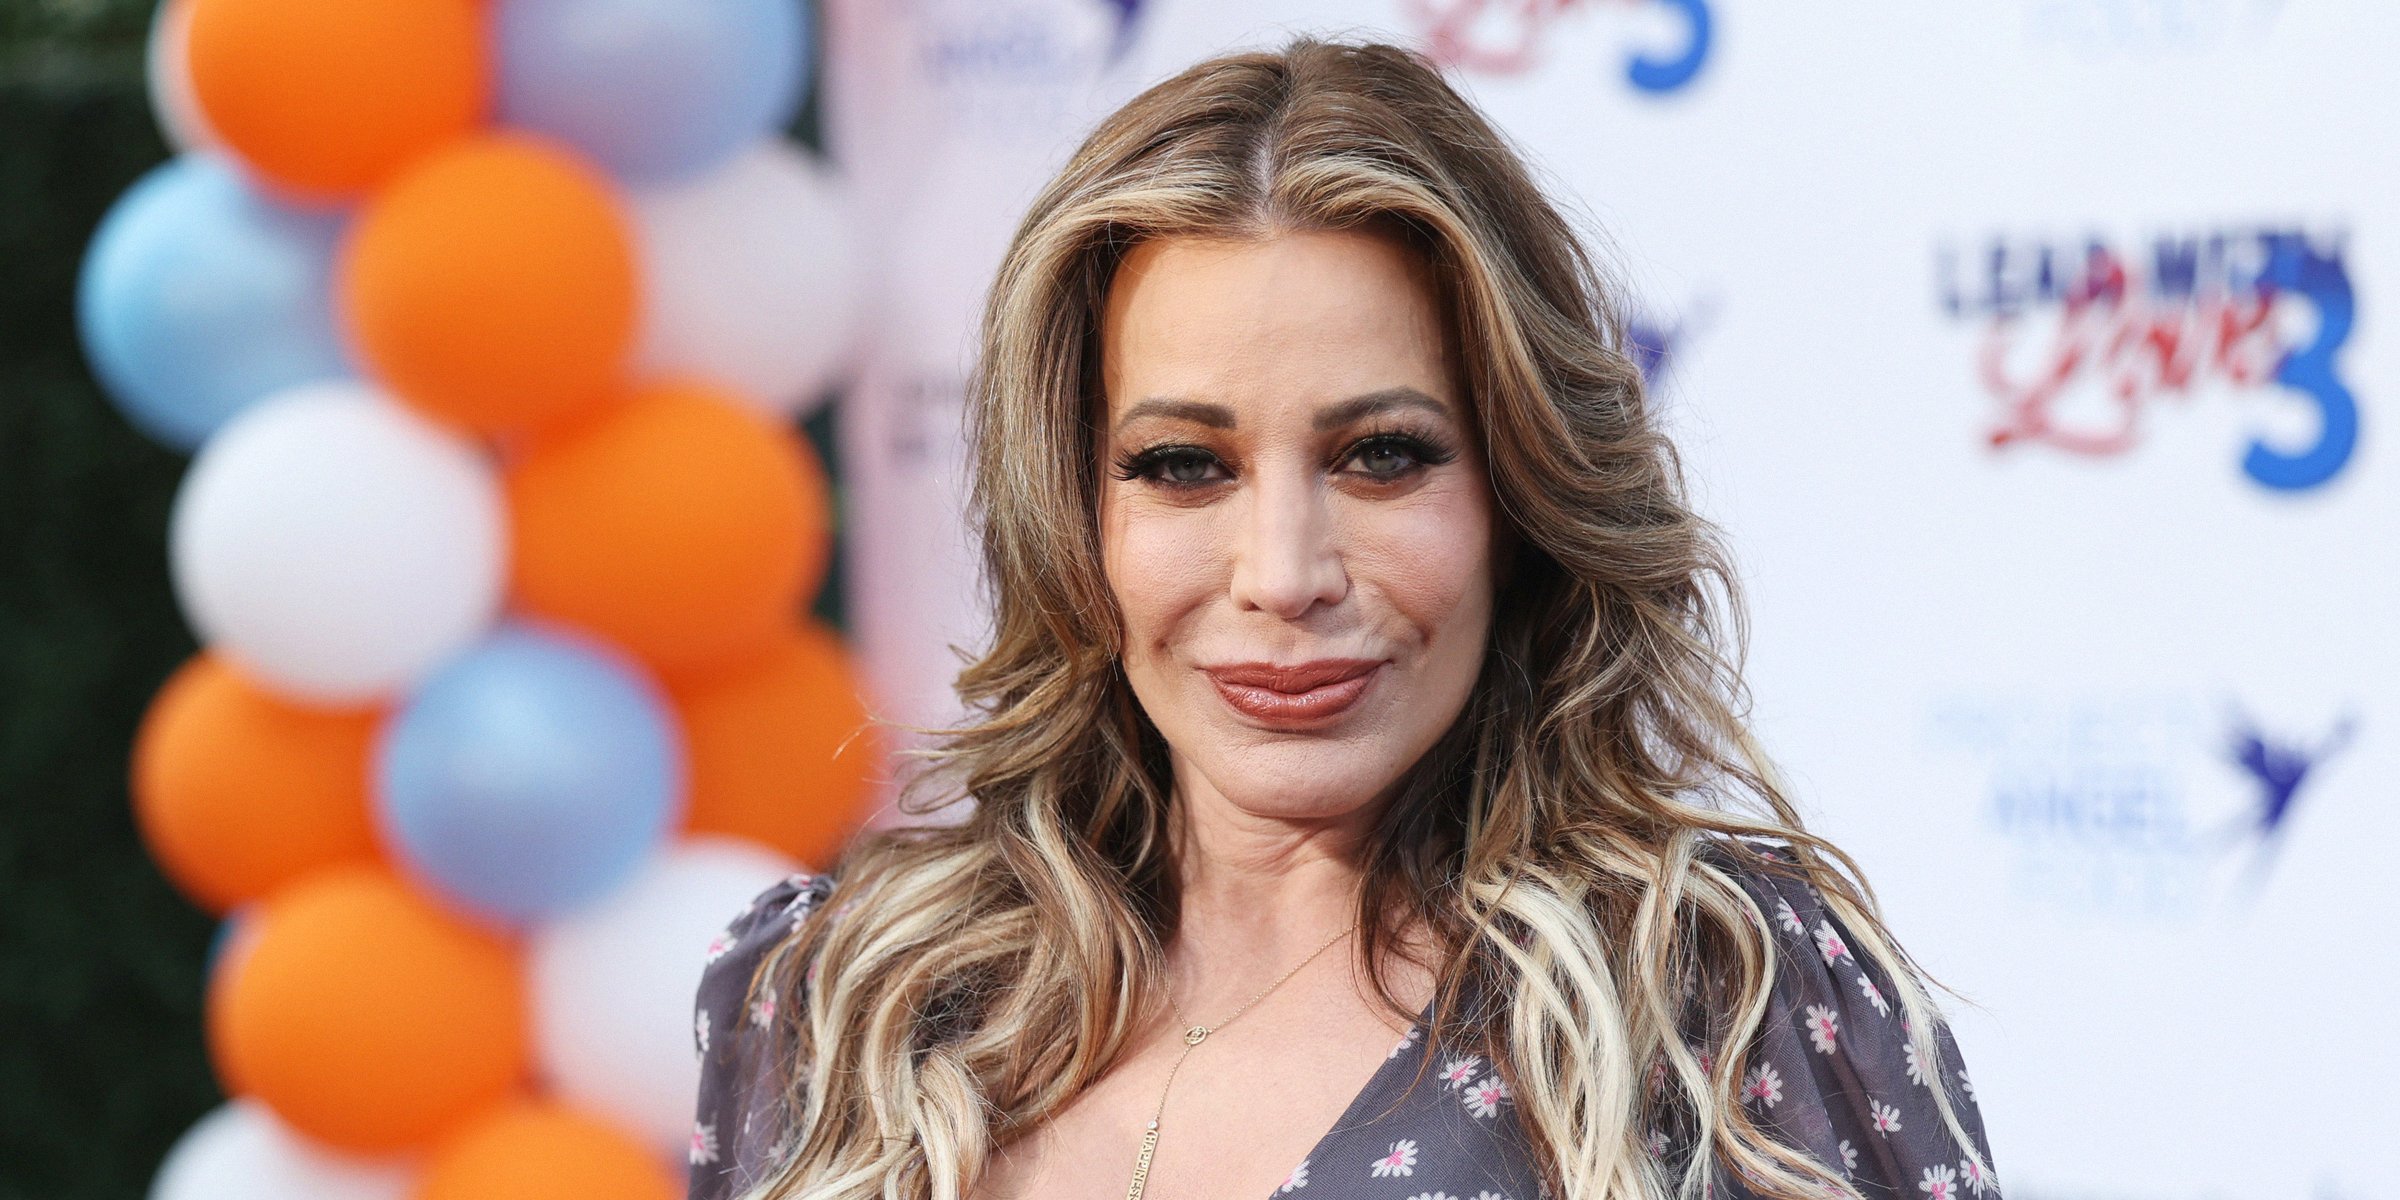 Taylor Dayne | Source: Getty Images